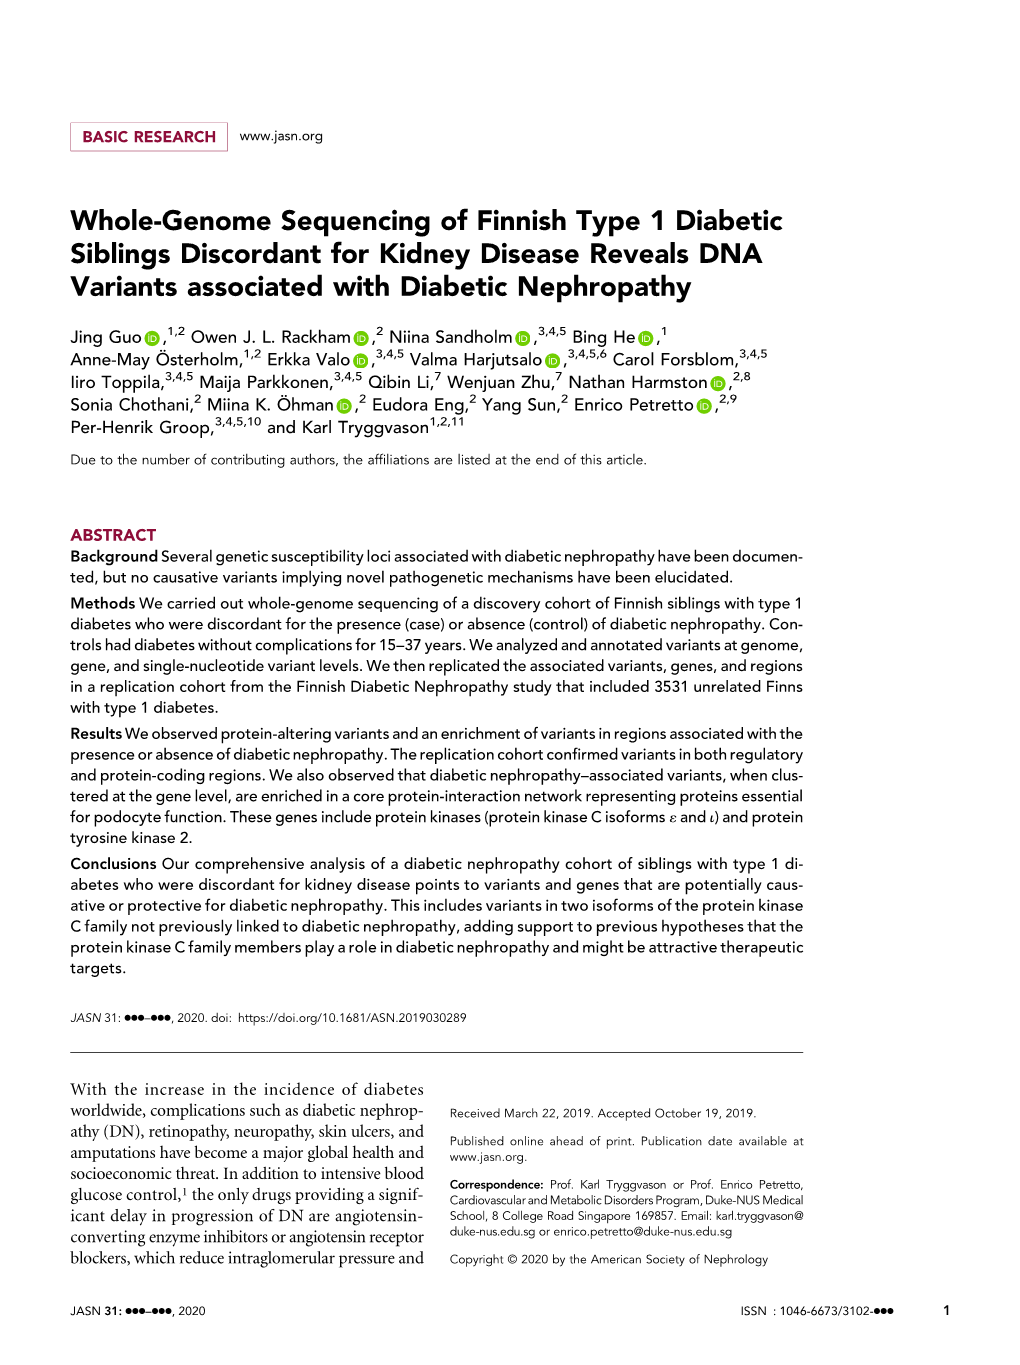 Whole-Genome Sequencing of Finnish Type 1 Diabetic Siblings Discordant for Kidney Disease Reveals DNA Variants Associated with Diabetic Nephropathy